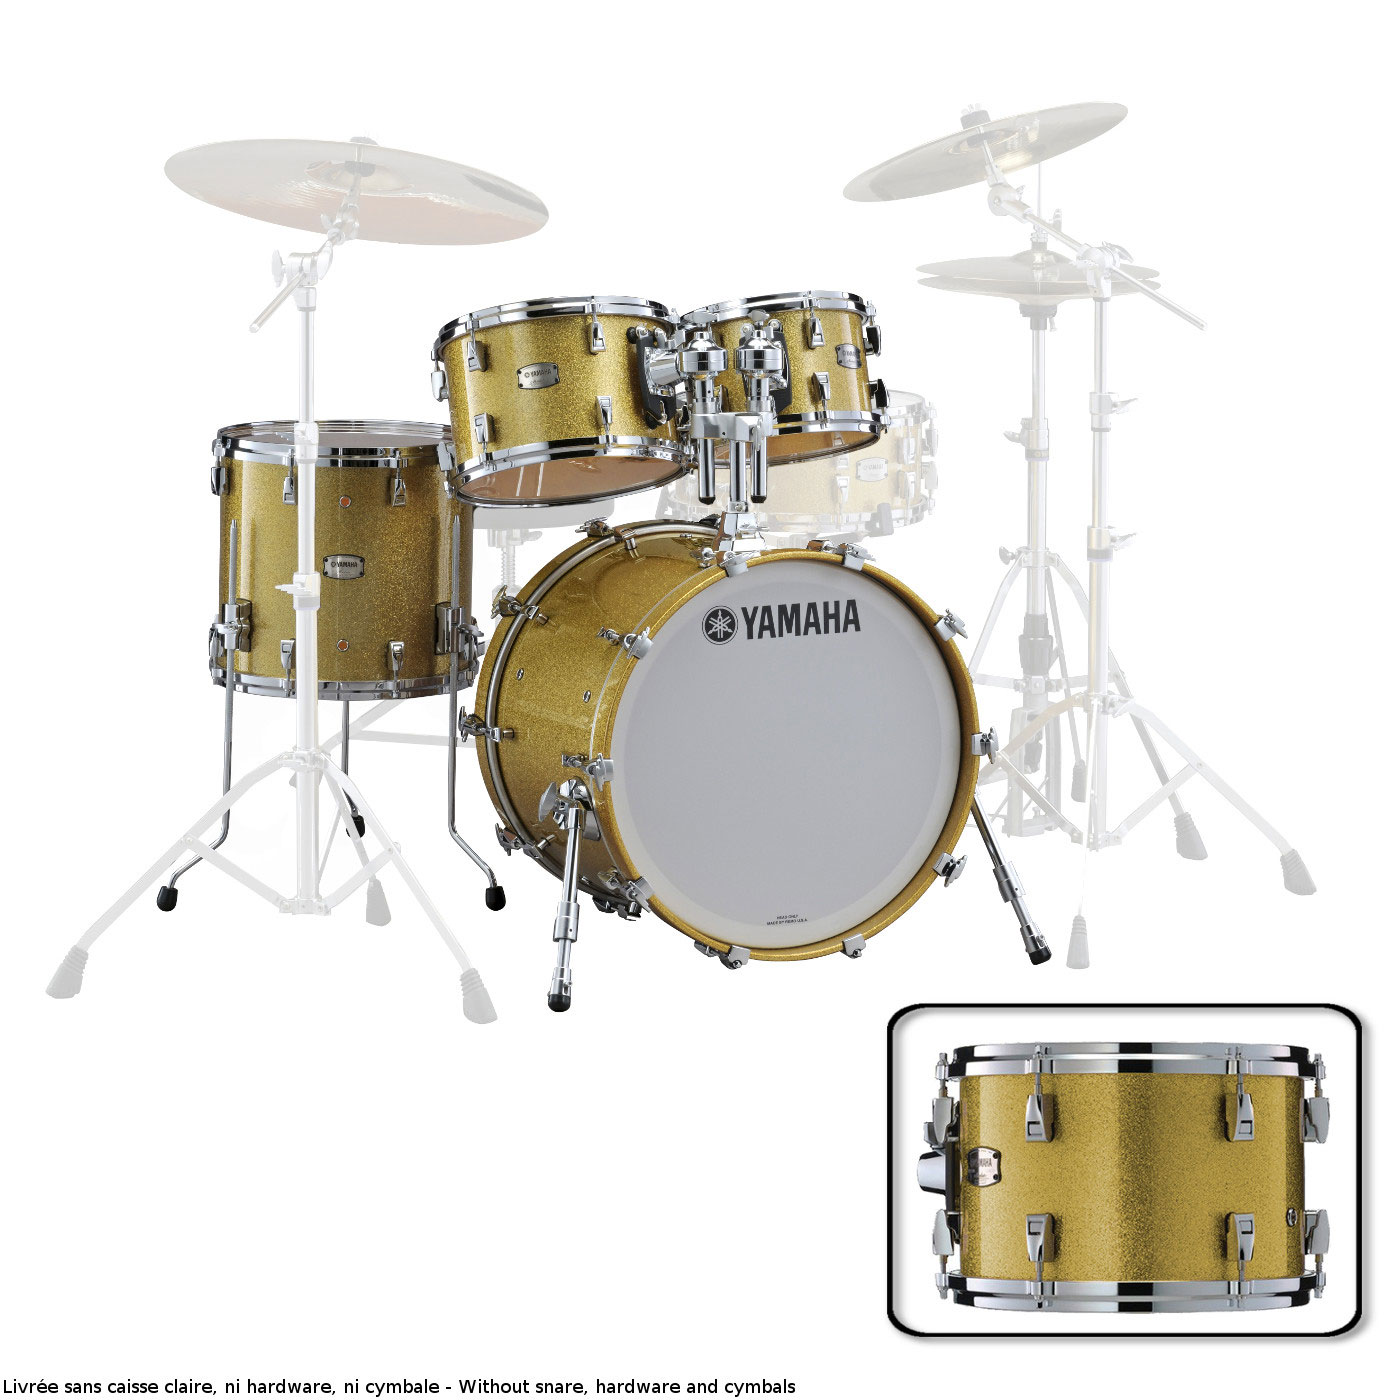 YAMAHA ABSOLUTE HYBRID MAPLE FUSION 20 GOLD CHAMPAGNE SPARK